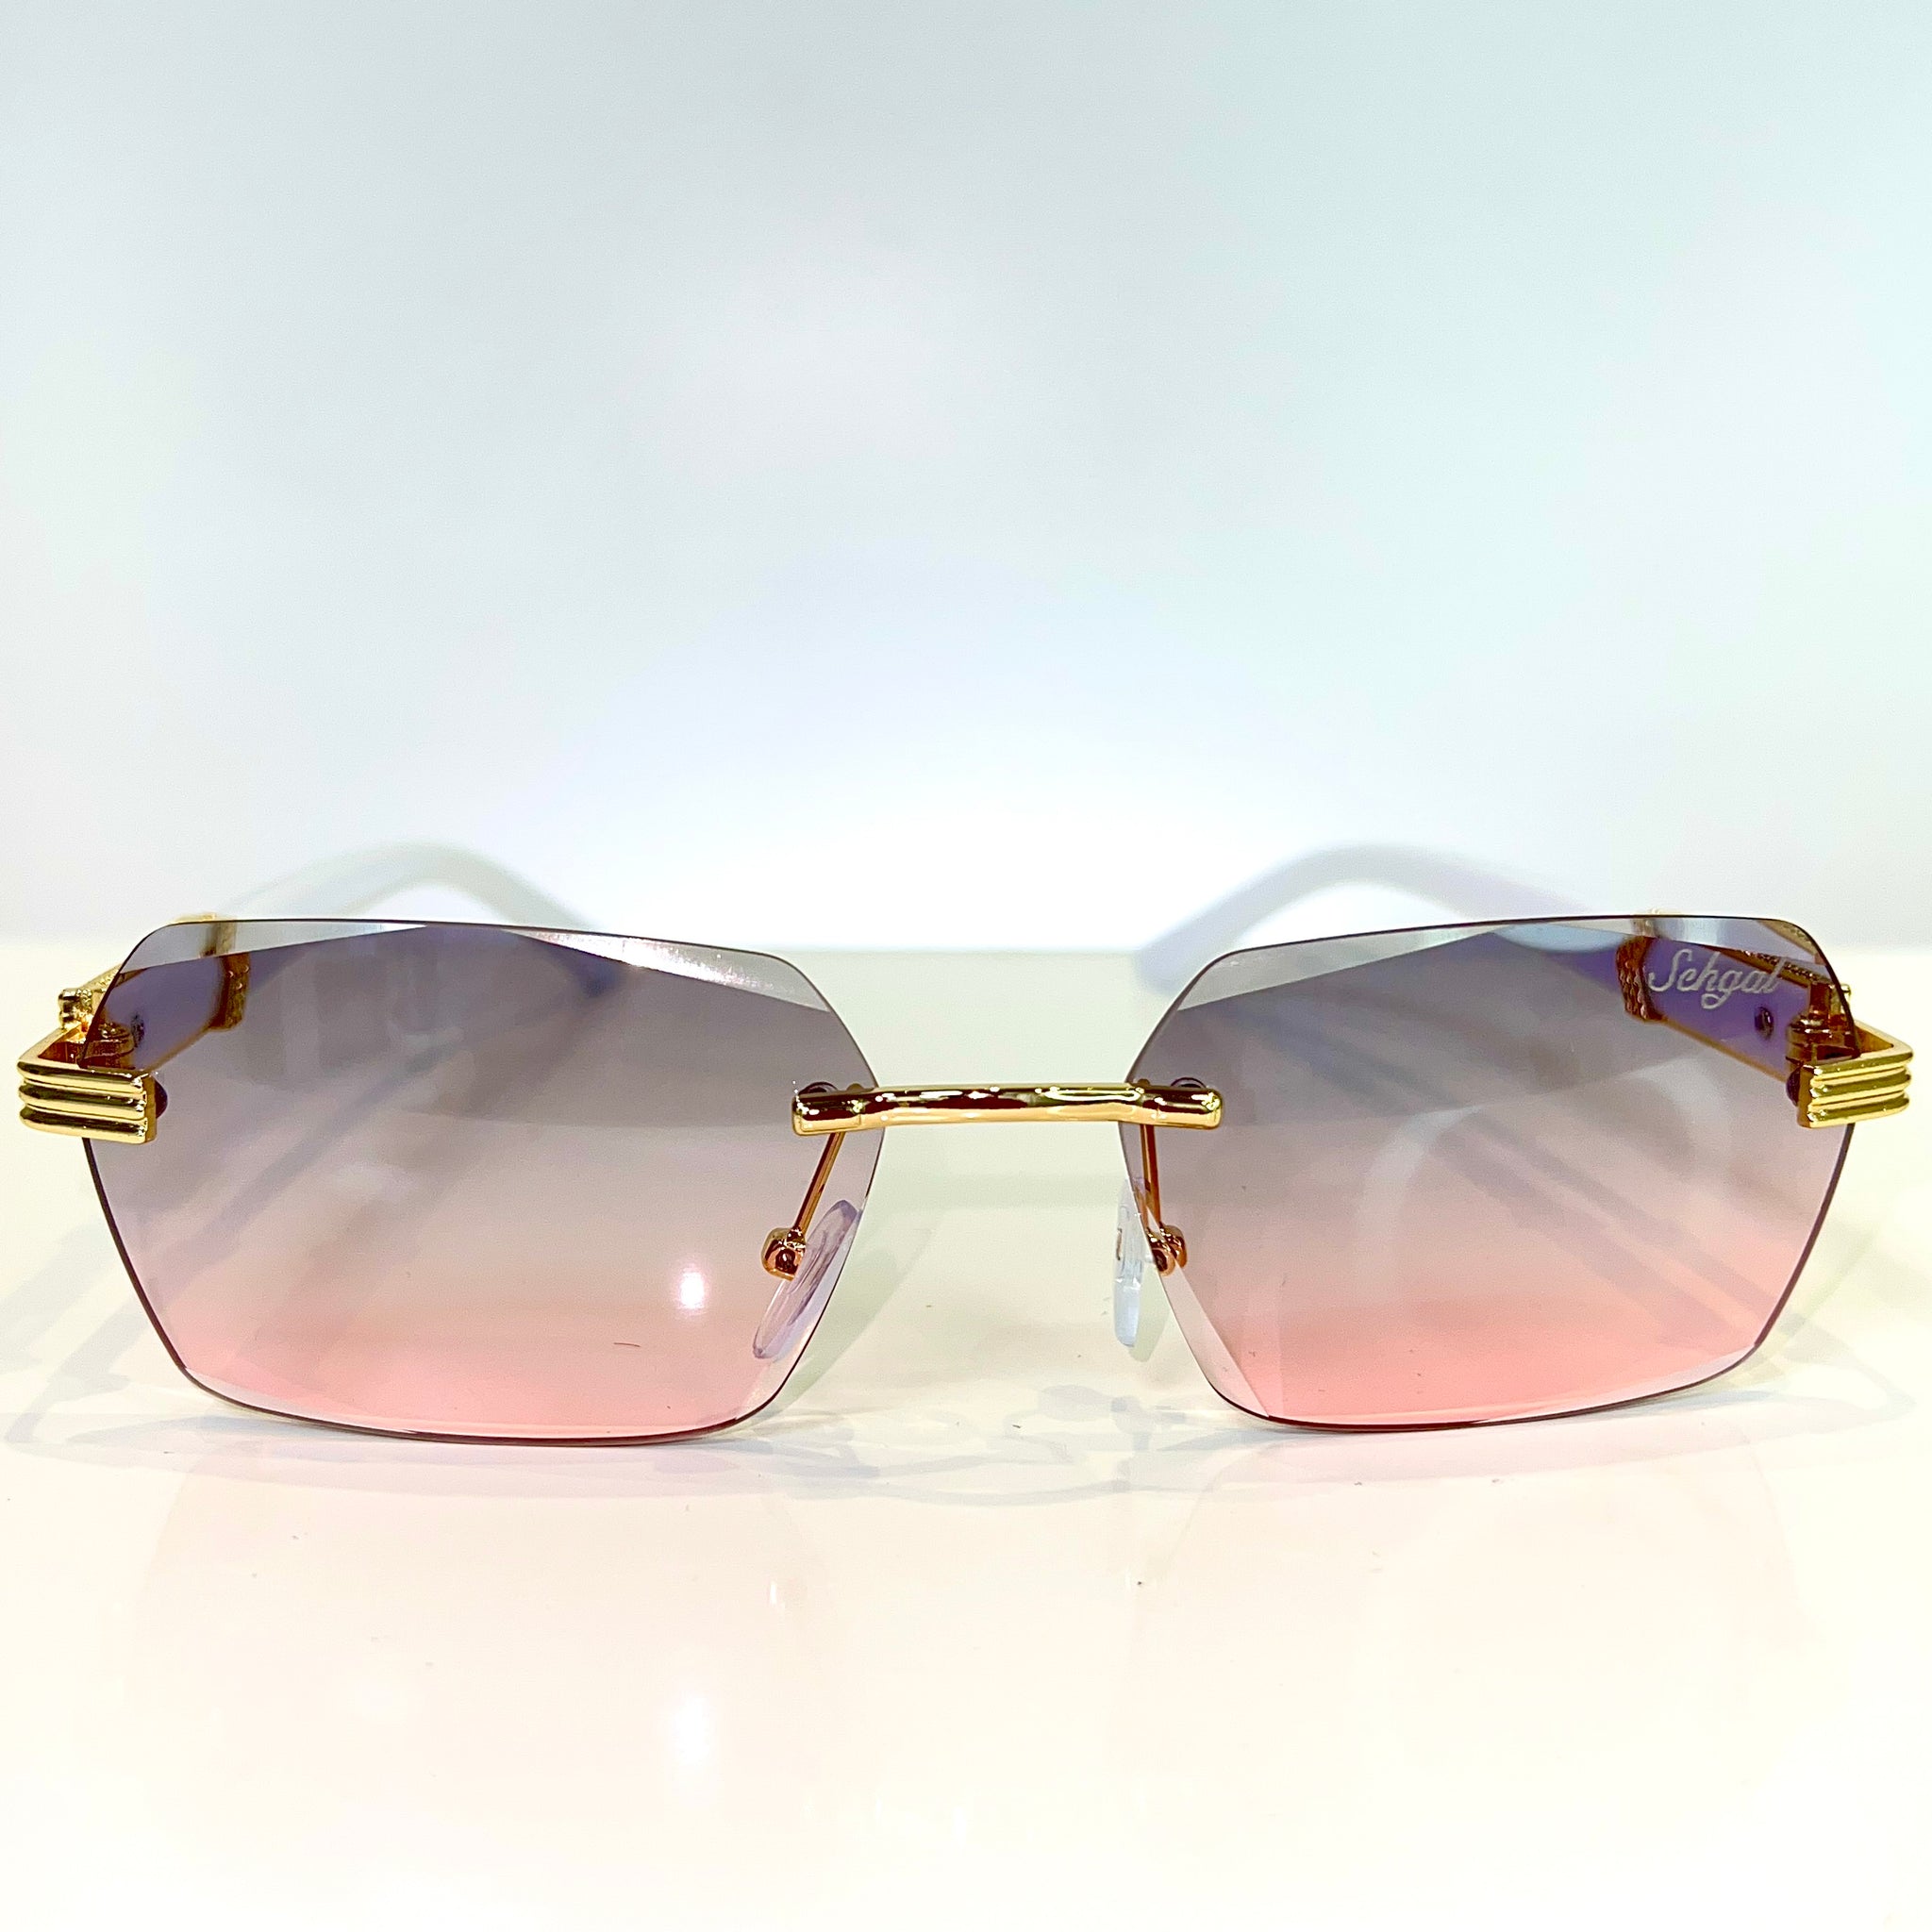 Marblecut Glasses - 14 carat gold plated -  Pink / Grey Shade